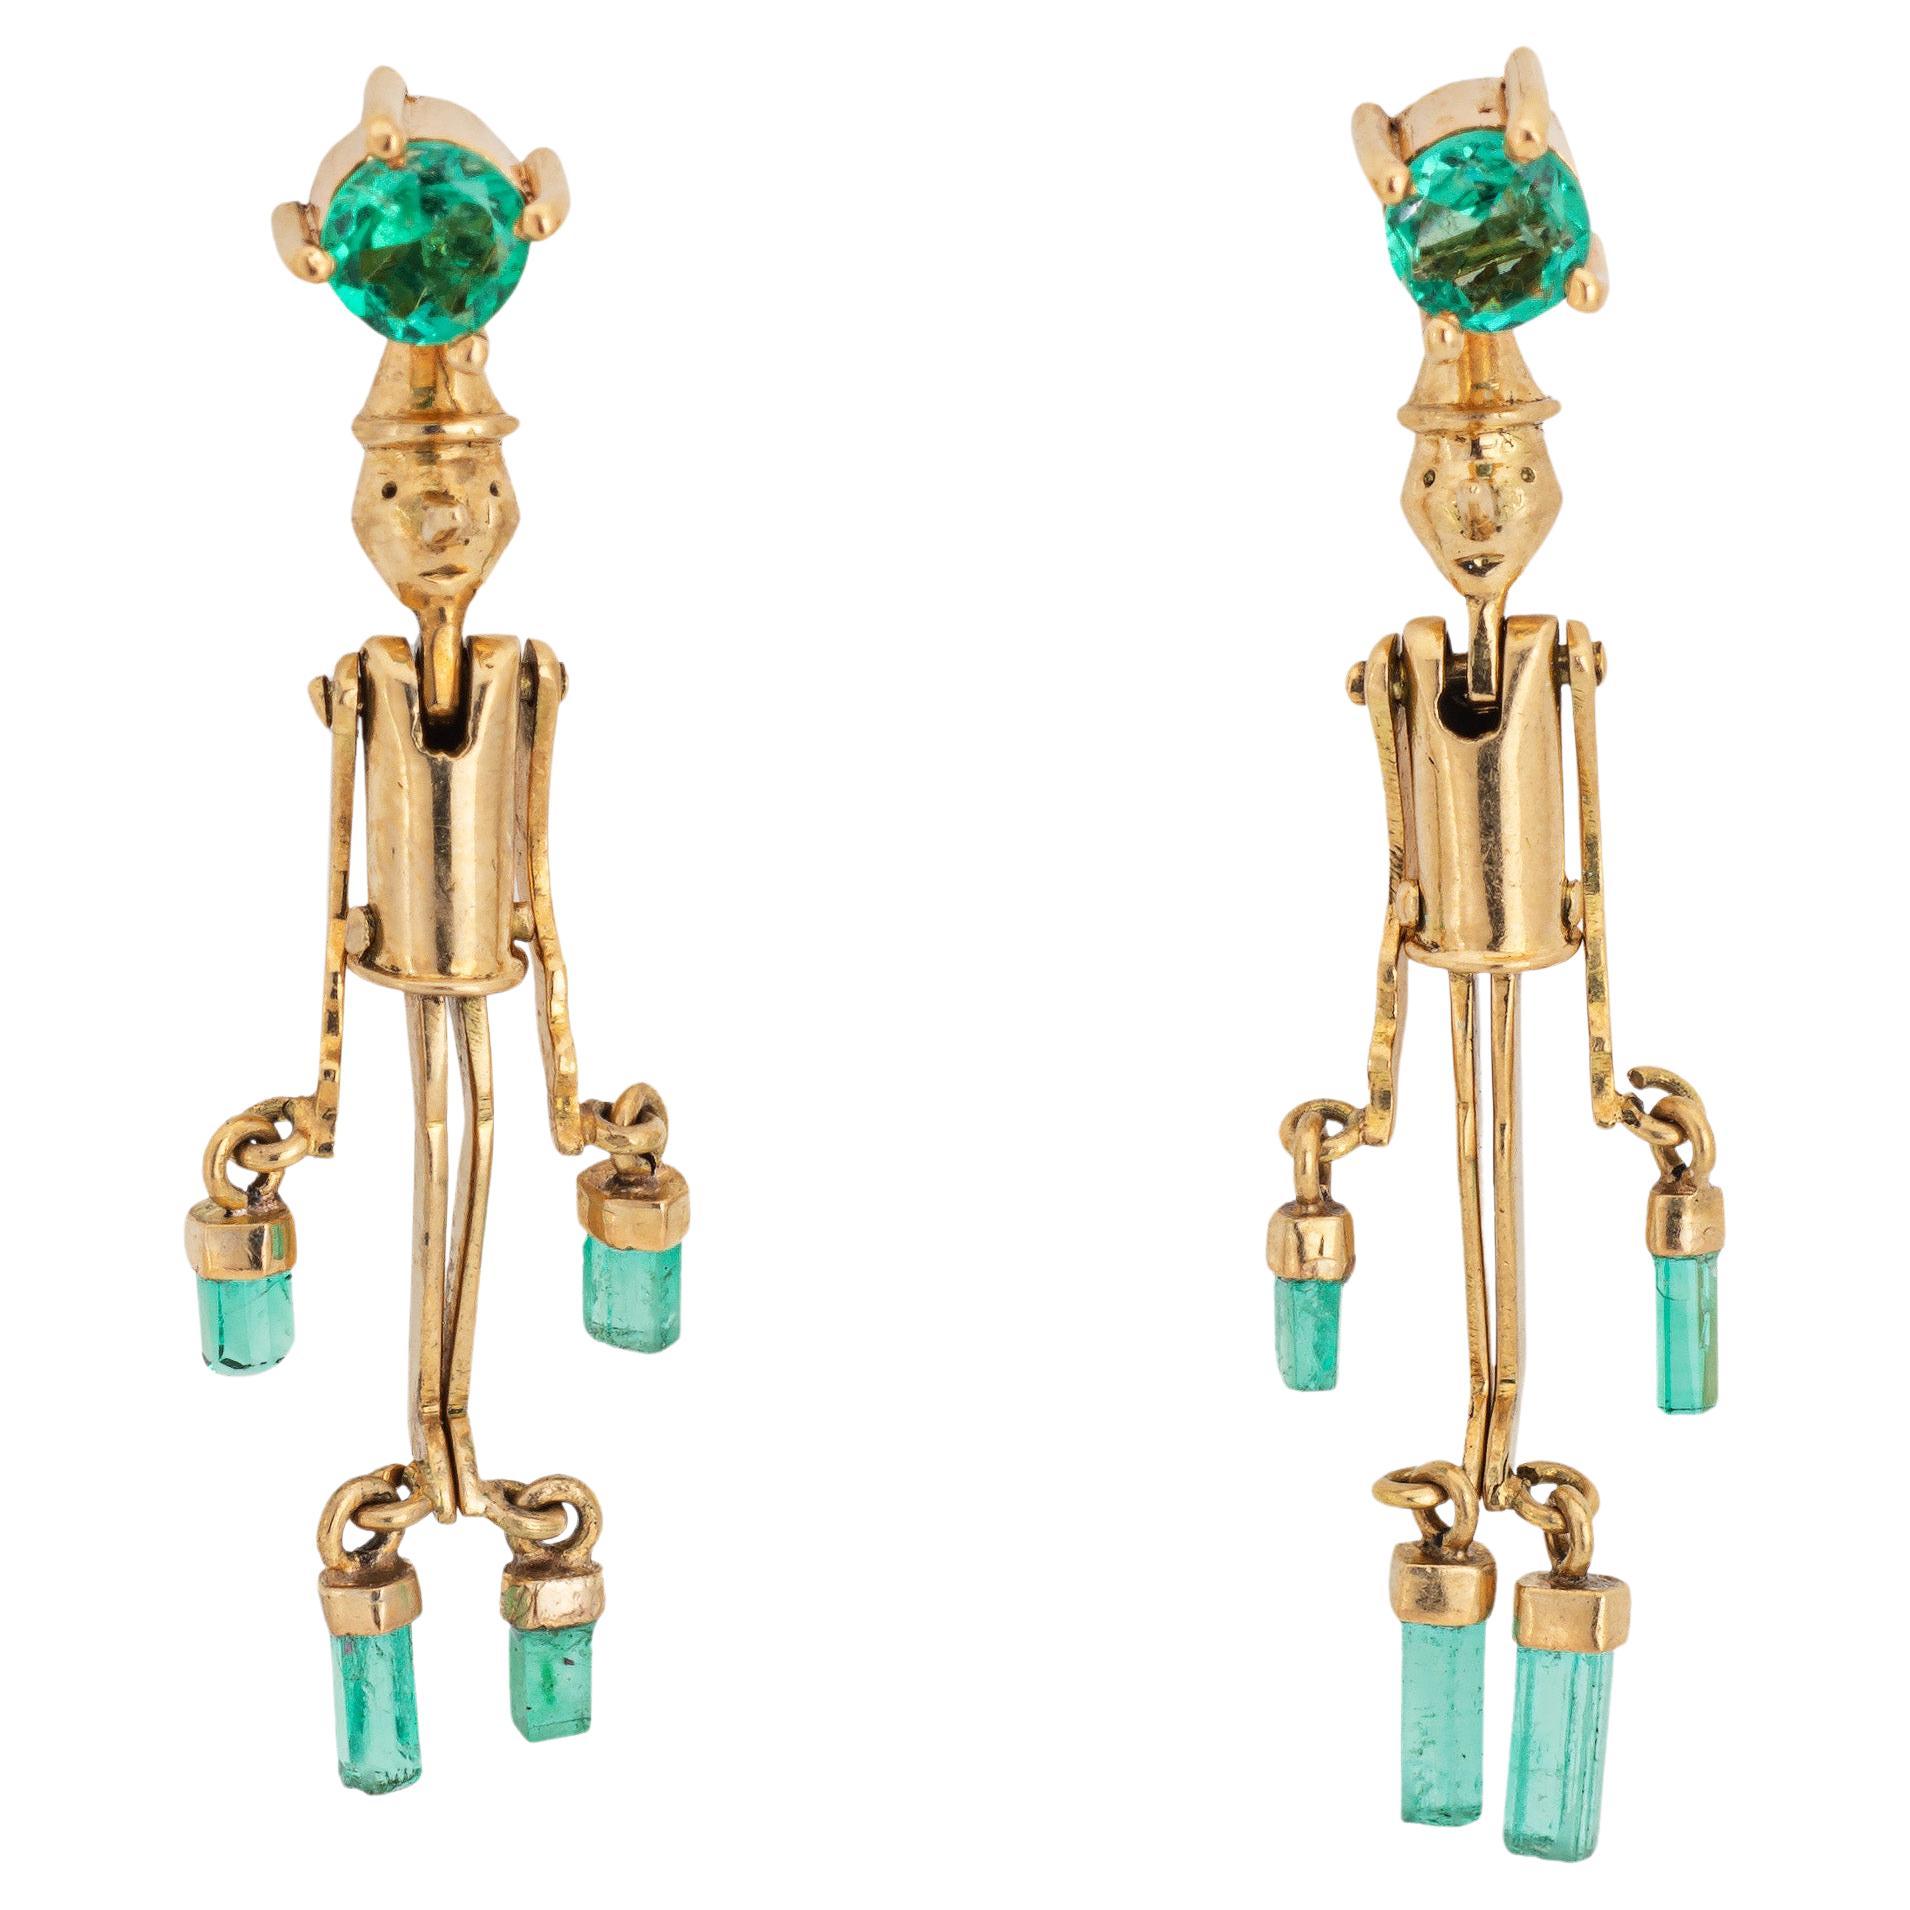 Pinocchio Emerald Earrings Articulated 18k Yellow Gold 1.25" Vintage Jewelry For Sale